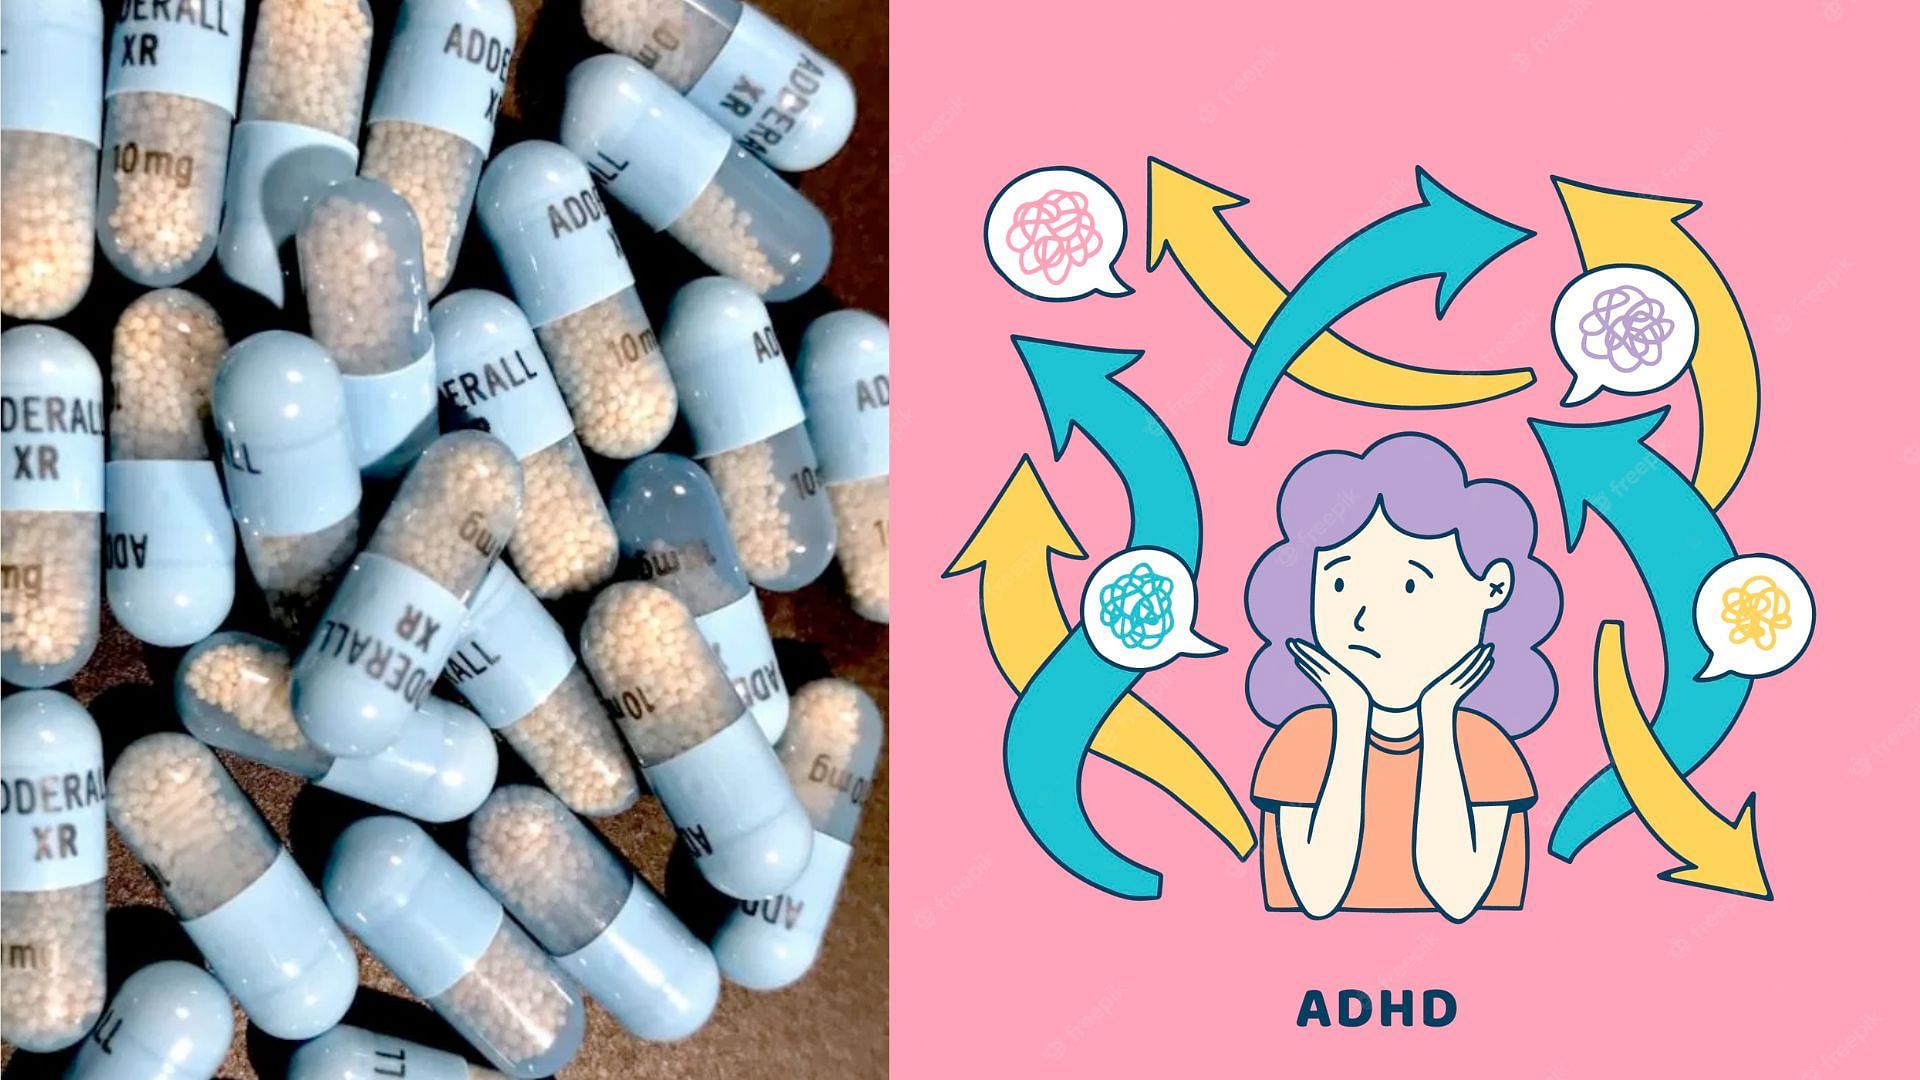 Shortage of drug that treats ADHD, Narcolepsy, and other disorders (image via NeB_4o1)